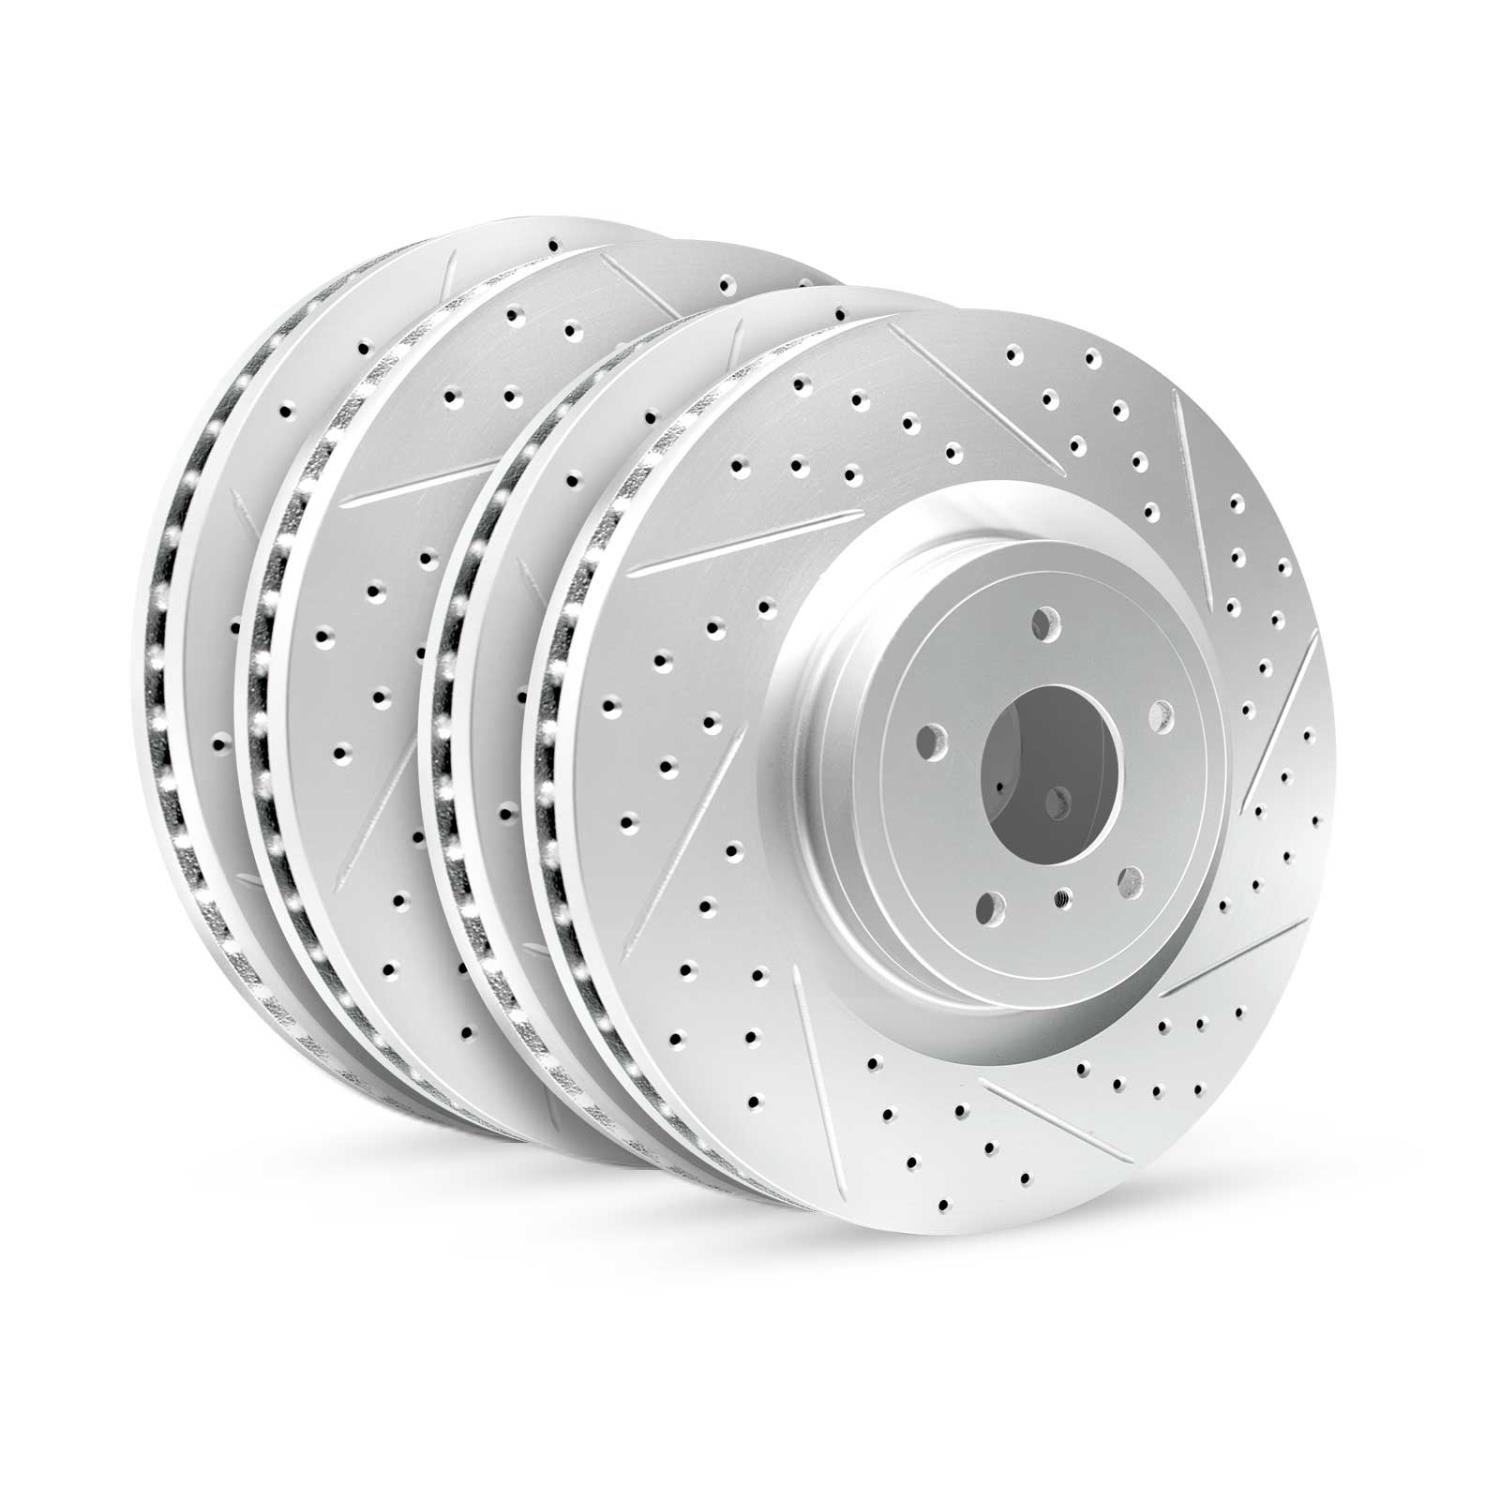 GEO-Carbon Drilled & Slotted Brake Rotor Set, Fits Select Fits Multiple Makes/Models, Position: Front & Rear